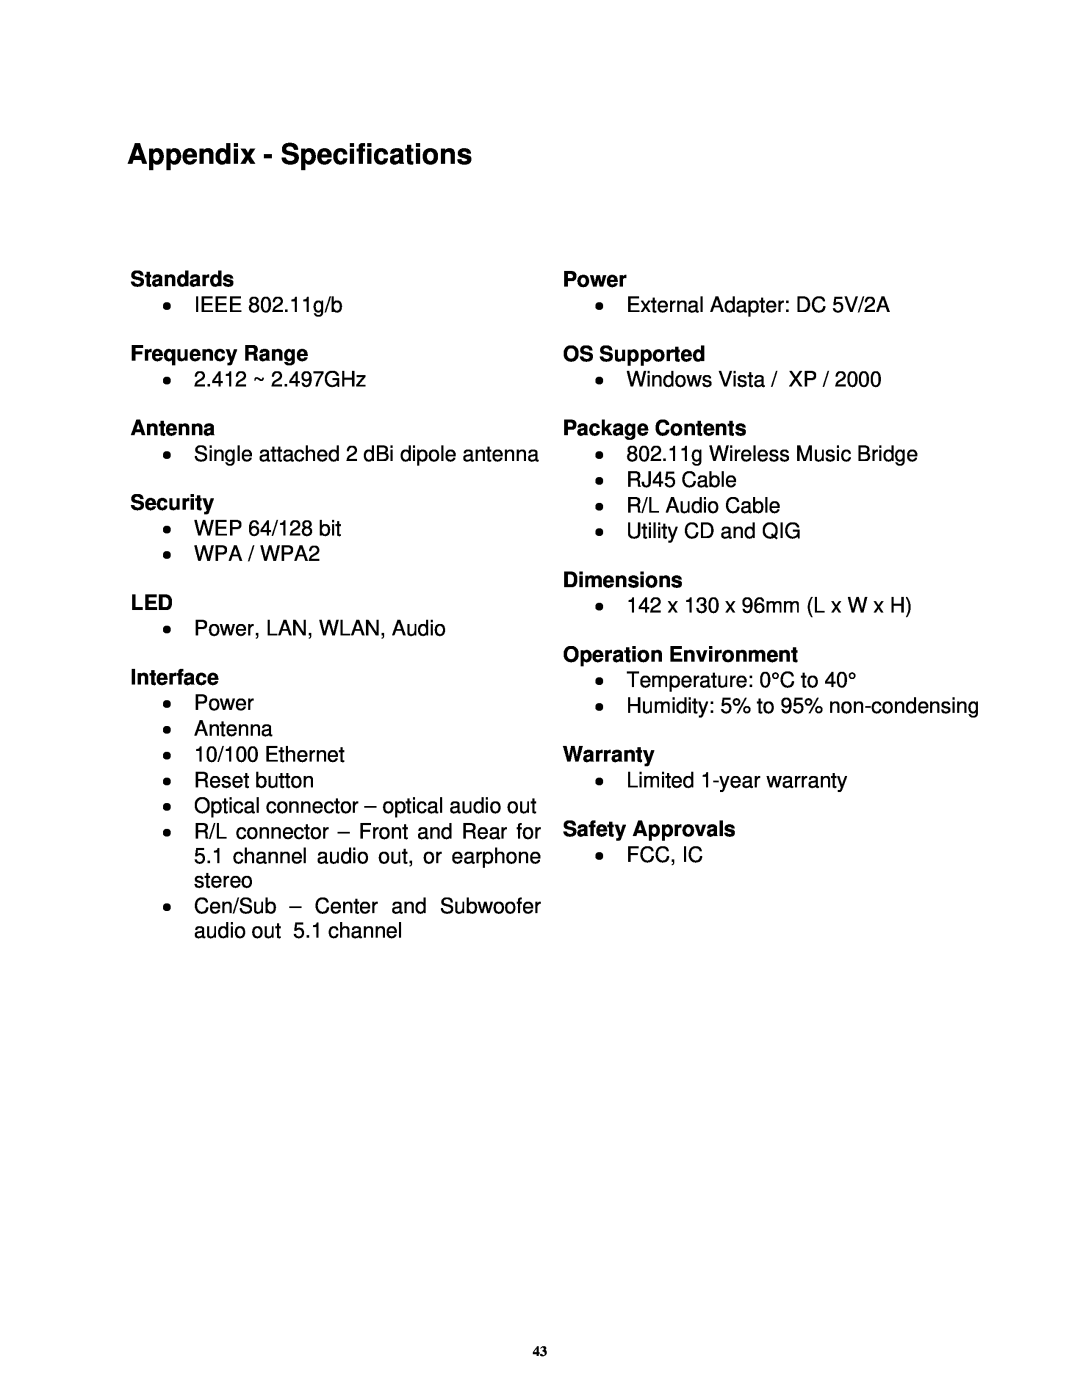 Airlink101 AWMB100 manual Appendix - Specifications 